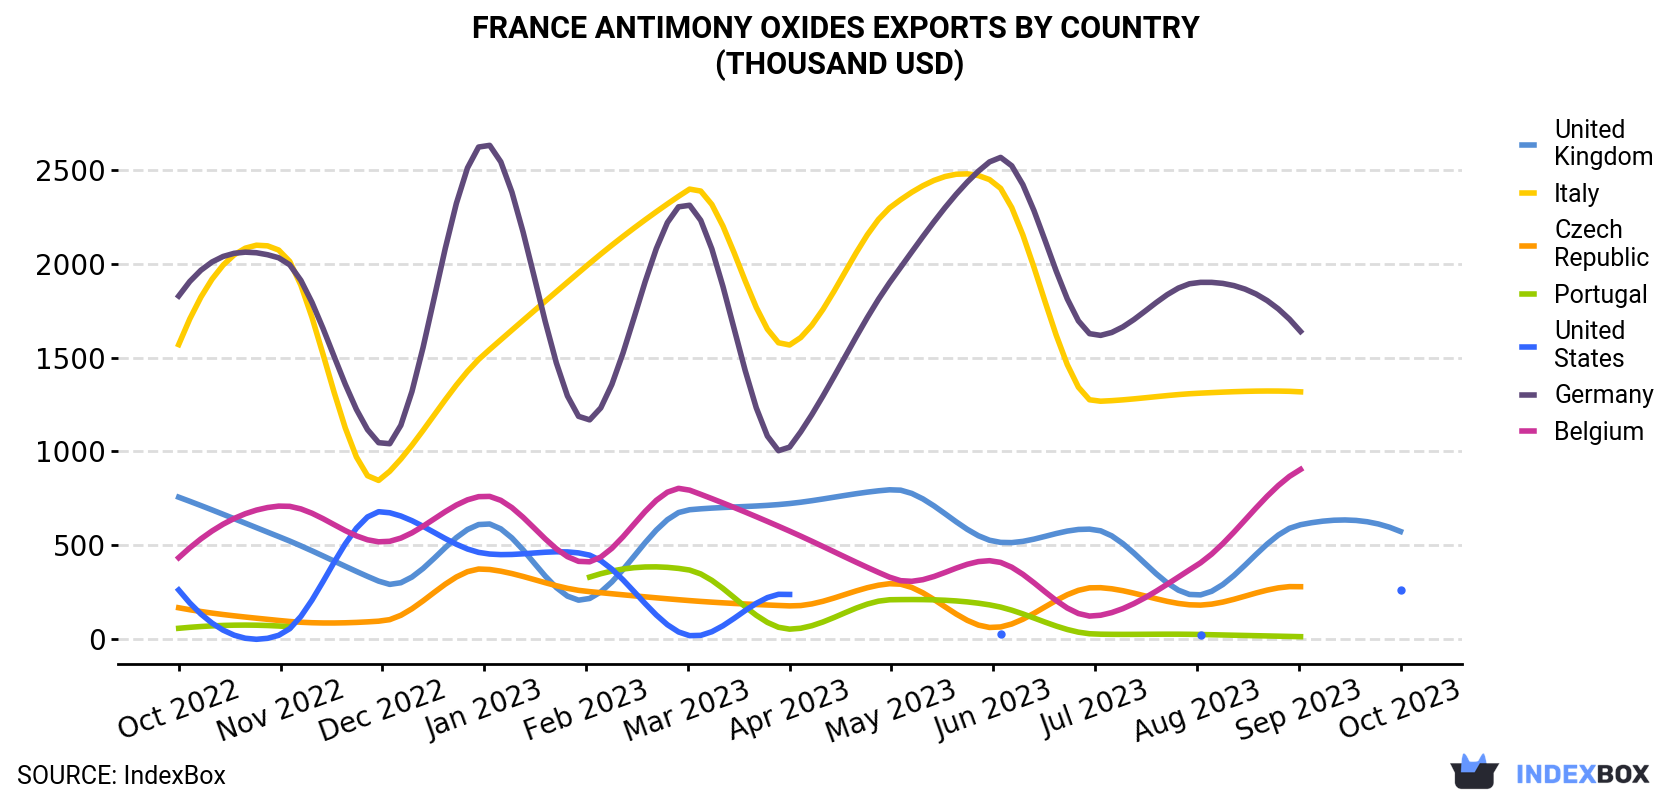 France Antimony Oxides Exports By Country (Thousand USD)